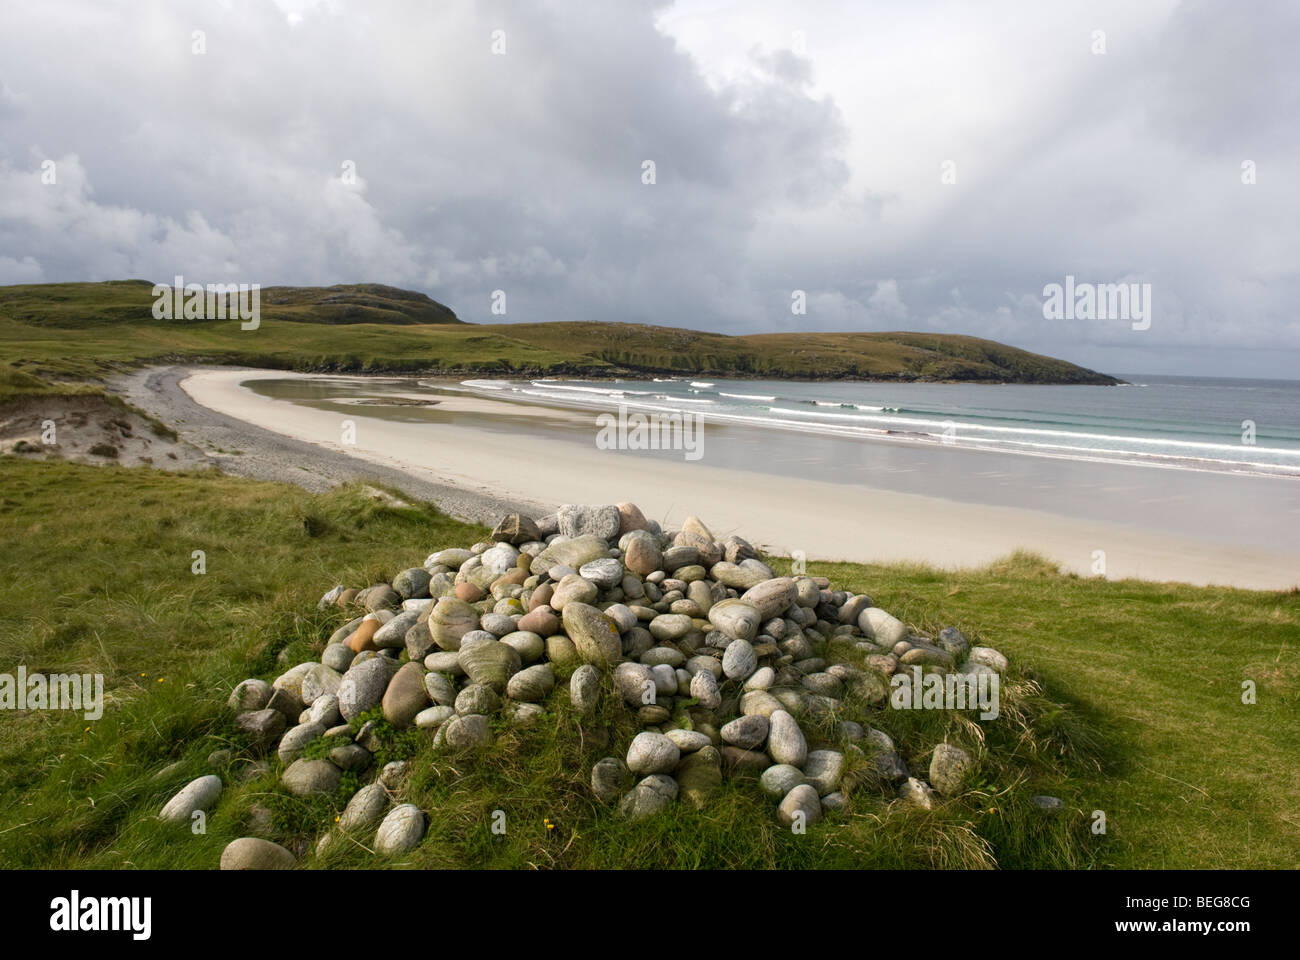 Traigh Siar beach, Isle of Vatersay, Outer Hebrides, Scotland. Stock Photo